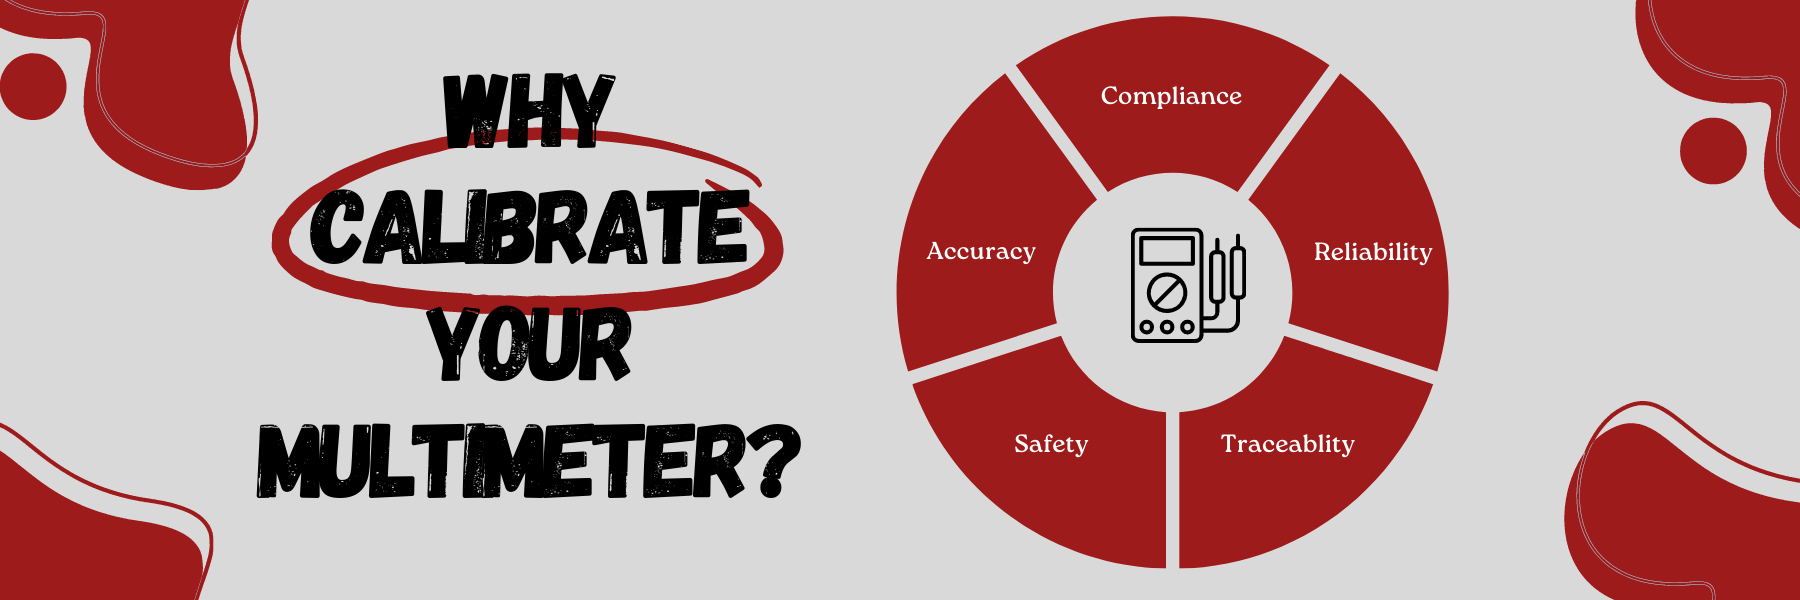 Multimeter Calibration - Why Calibrate Your Multimeter